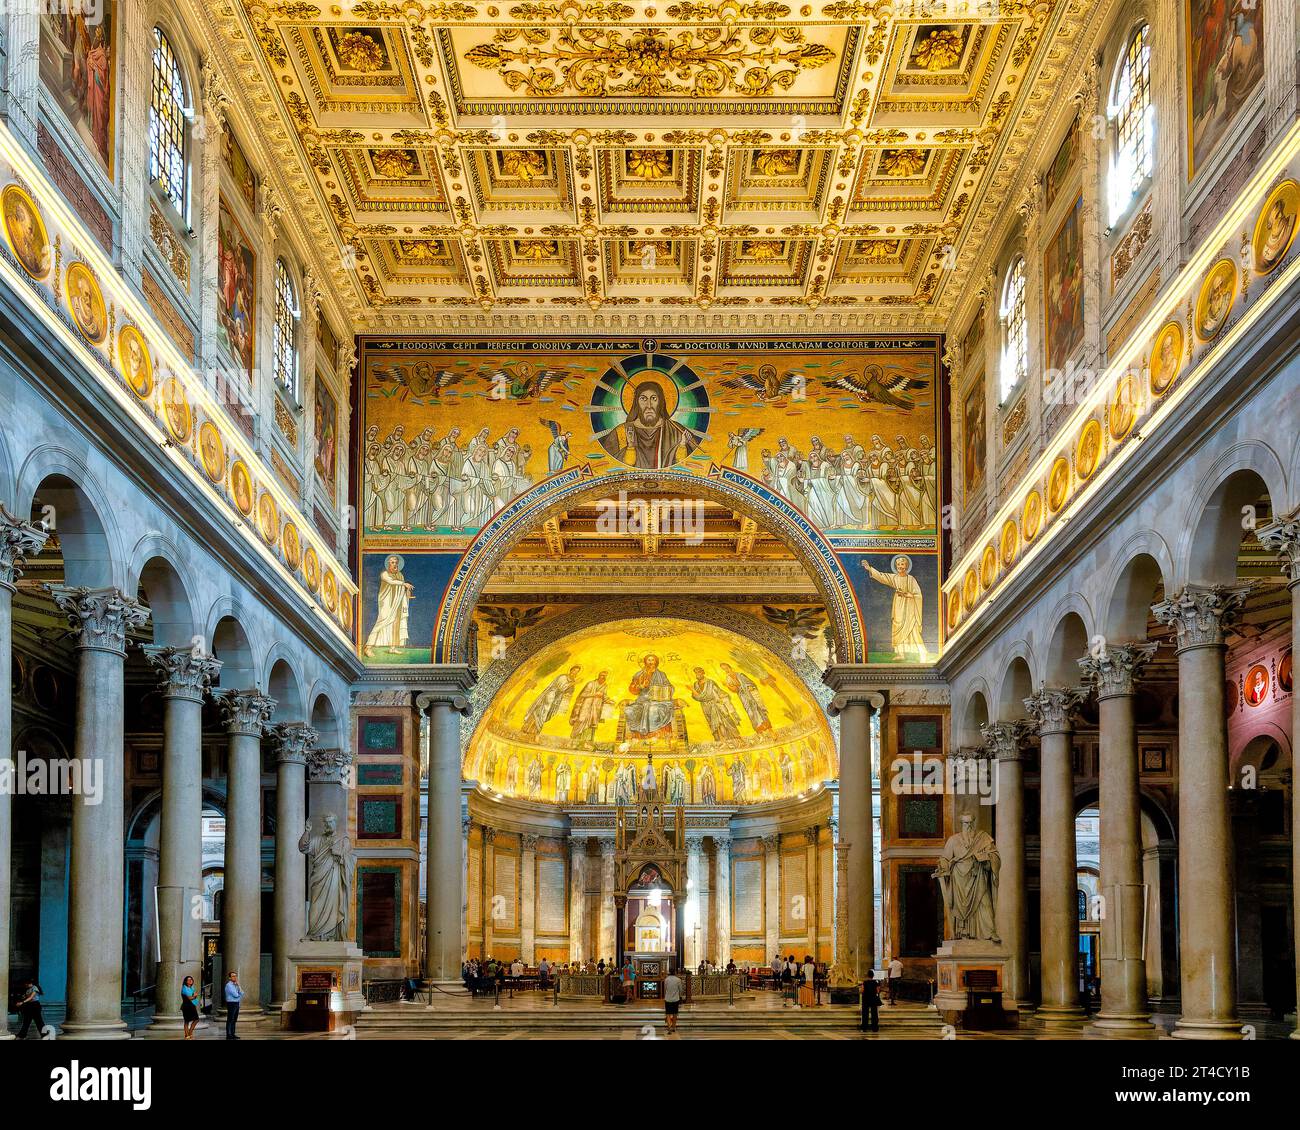 Interior of the Basilica of Saint Paul Outside the Walls, Rome, Italy Stock Photo